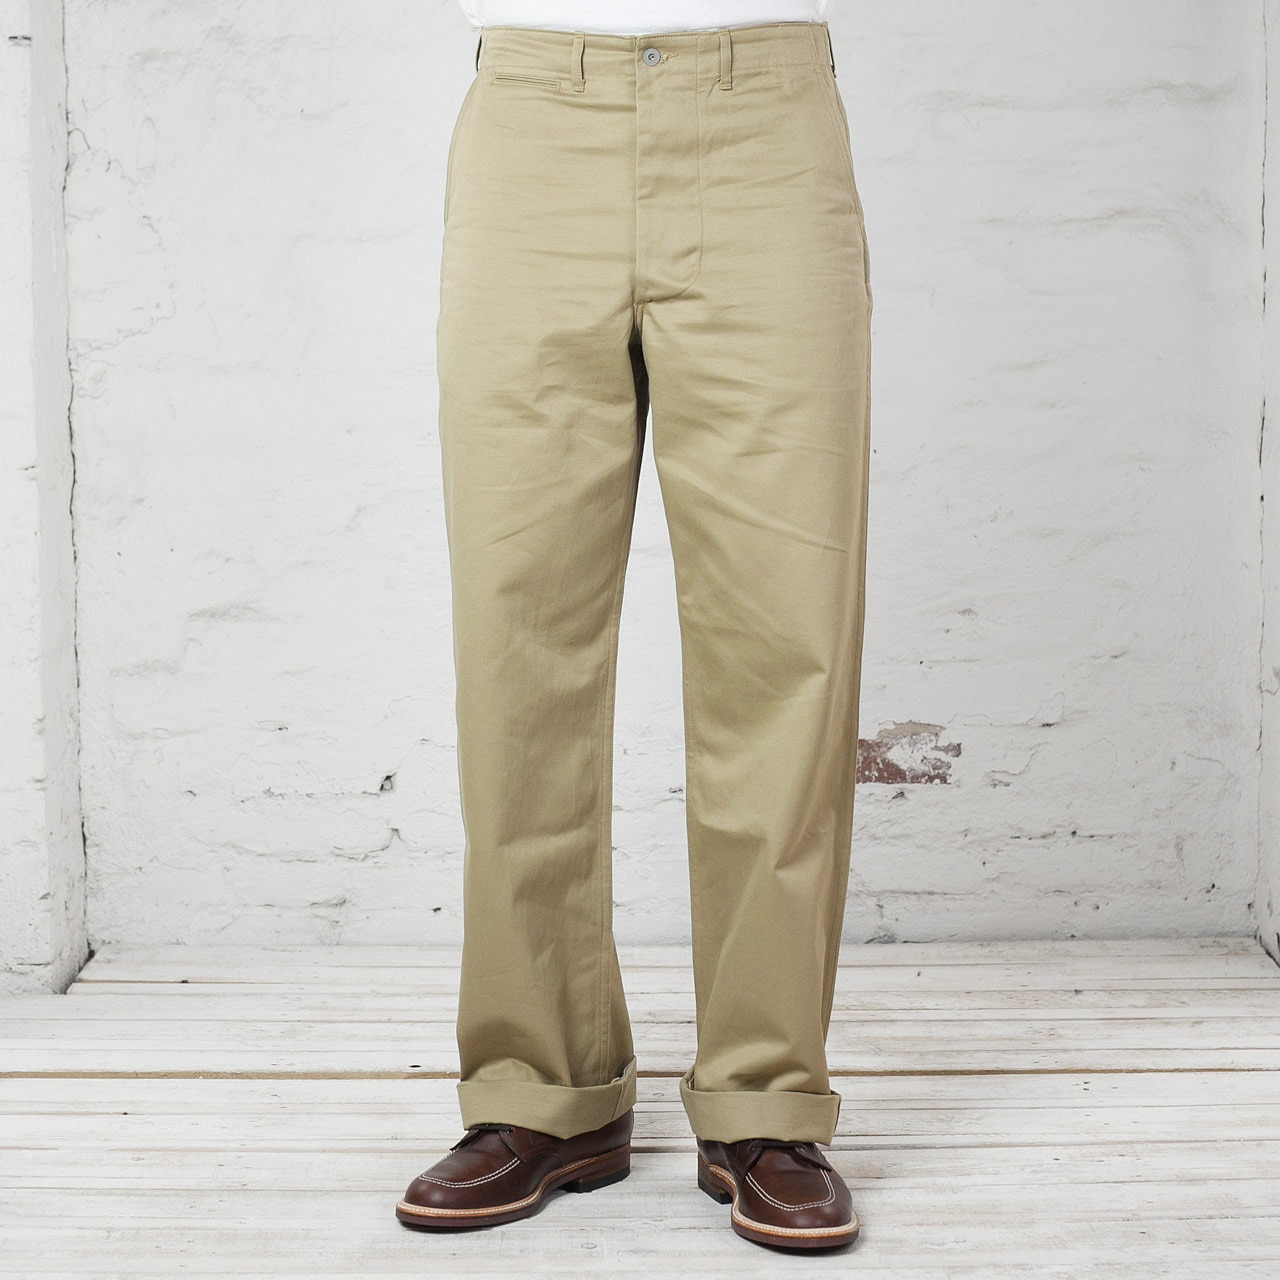 Wholesale 2019 High Quality Cotton Trousers Chinos Men's Pants Skinny Fit  GuangZhou From m.alibaba.com